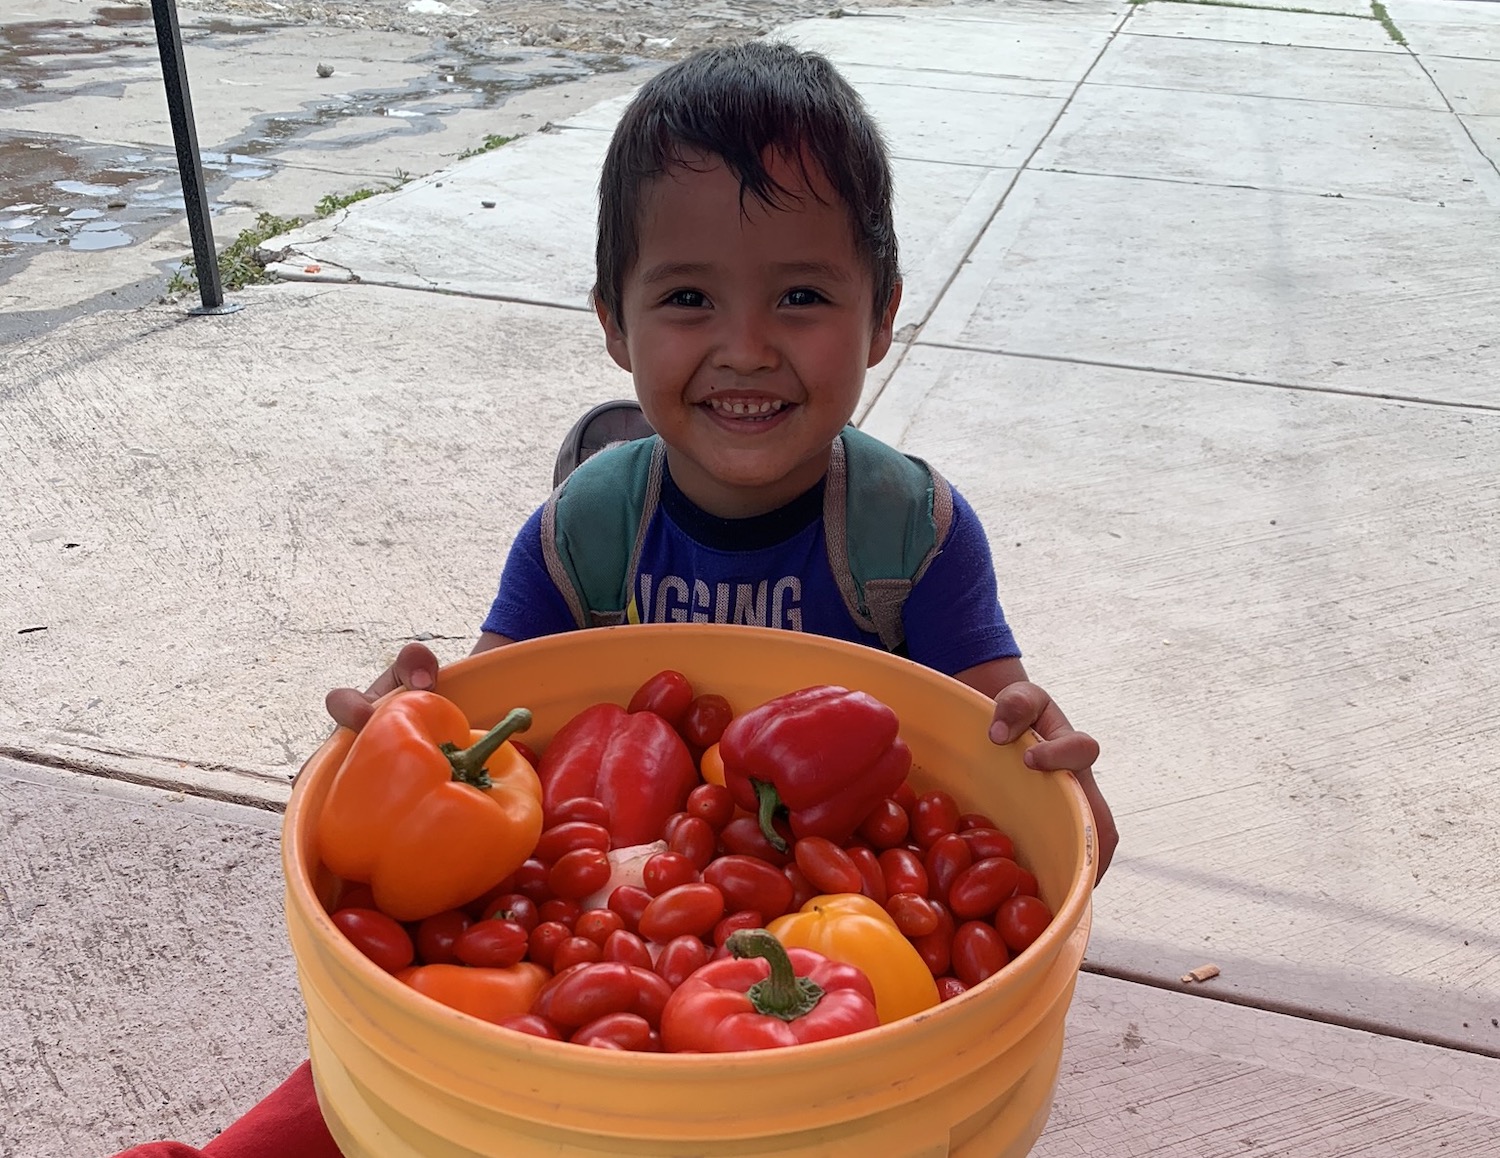 Boy with Bucket of Produce - BAMX food bank network is fighting food insecurity in Mexico